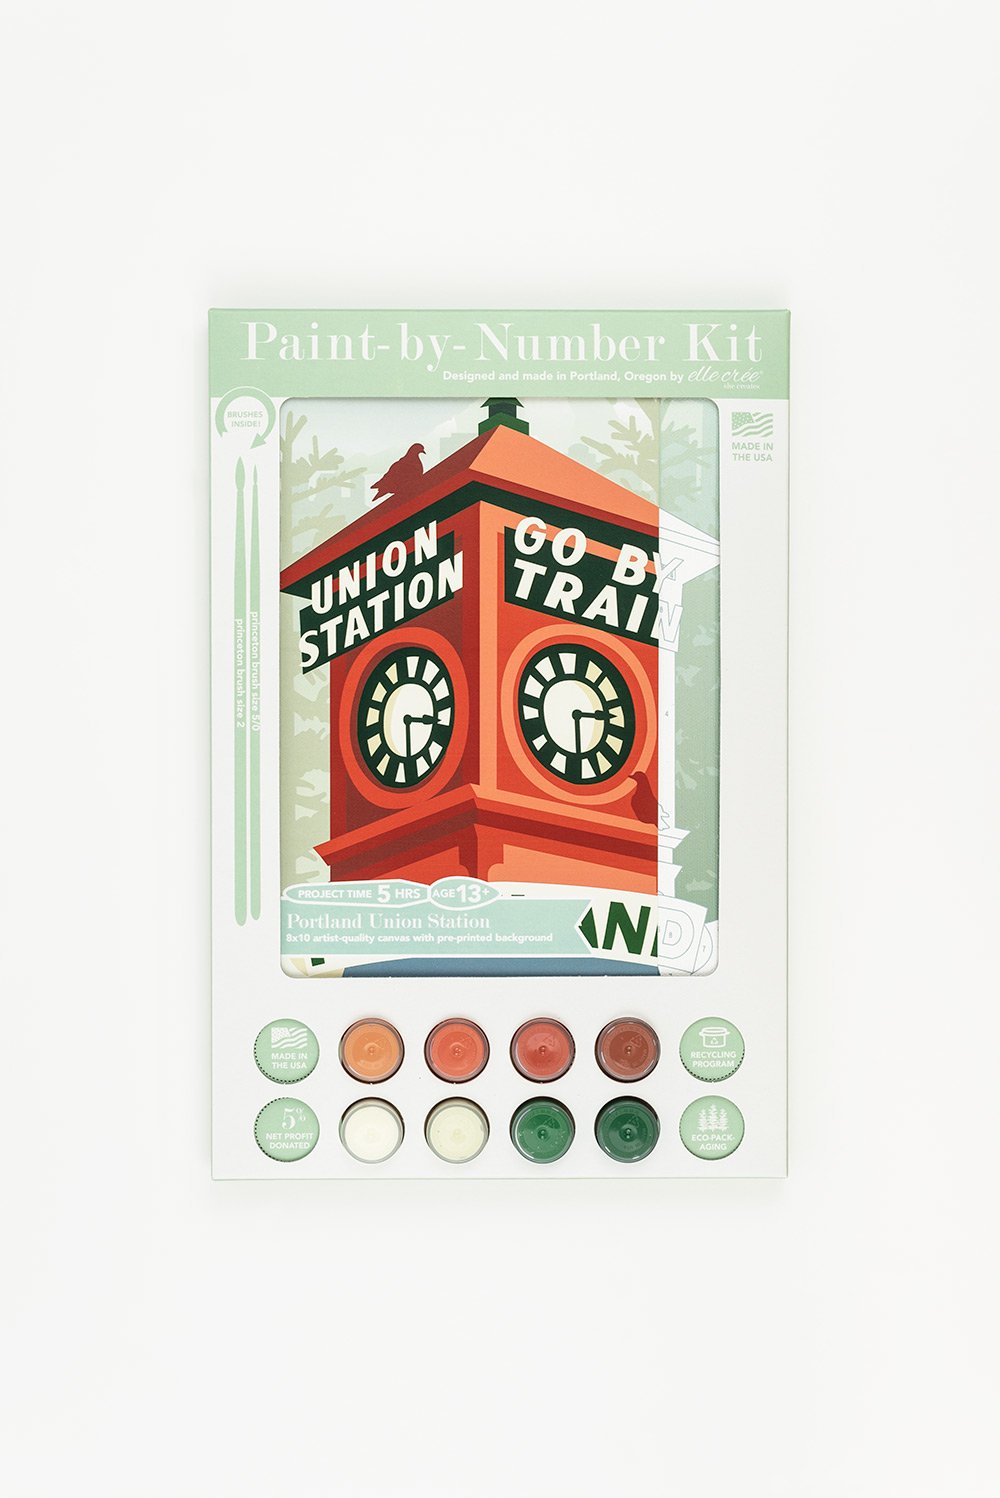 Paint by Number Kit! — The Craft Studio